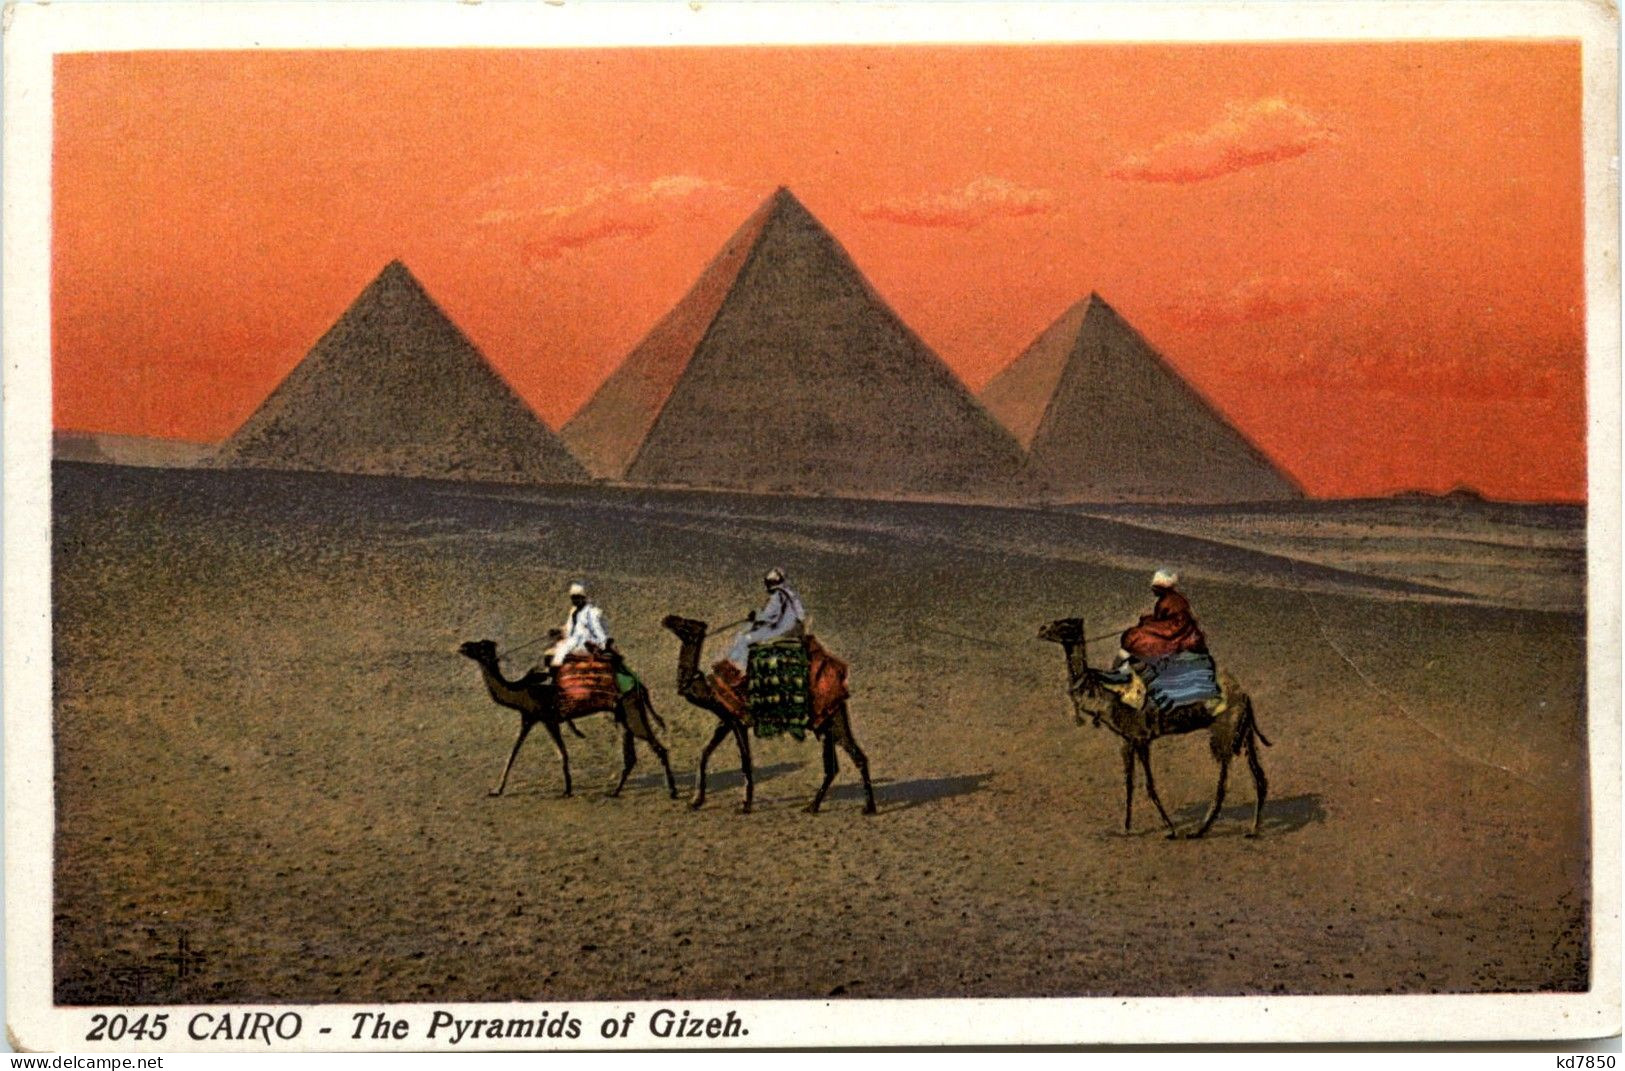 Cairo - The Pyramids Of Gizeh - Le Caire